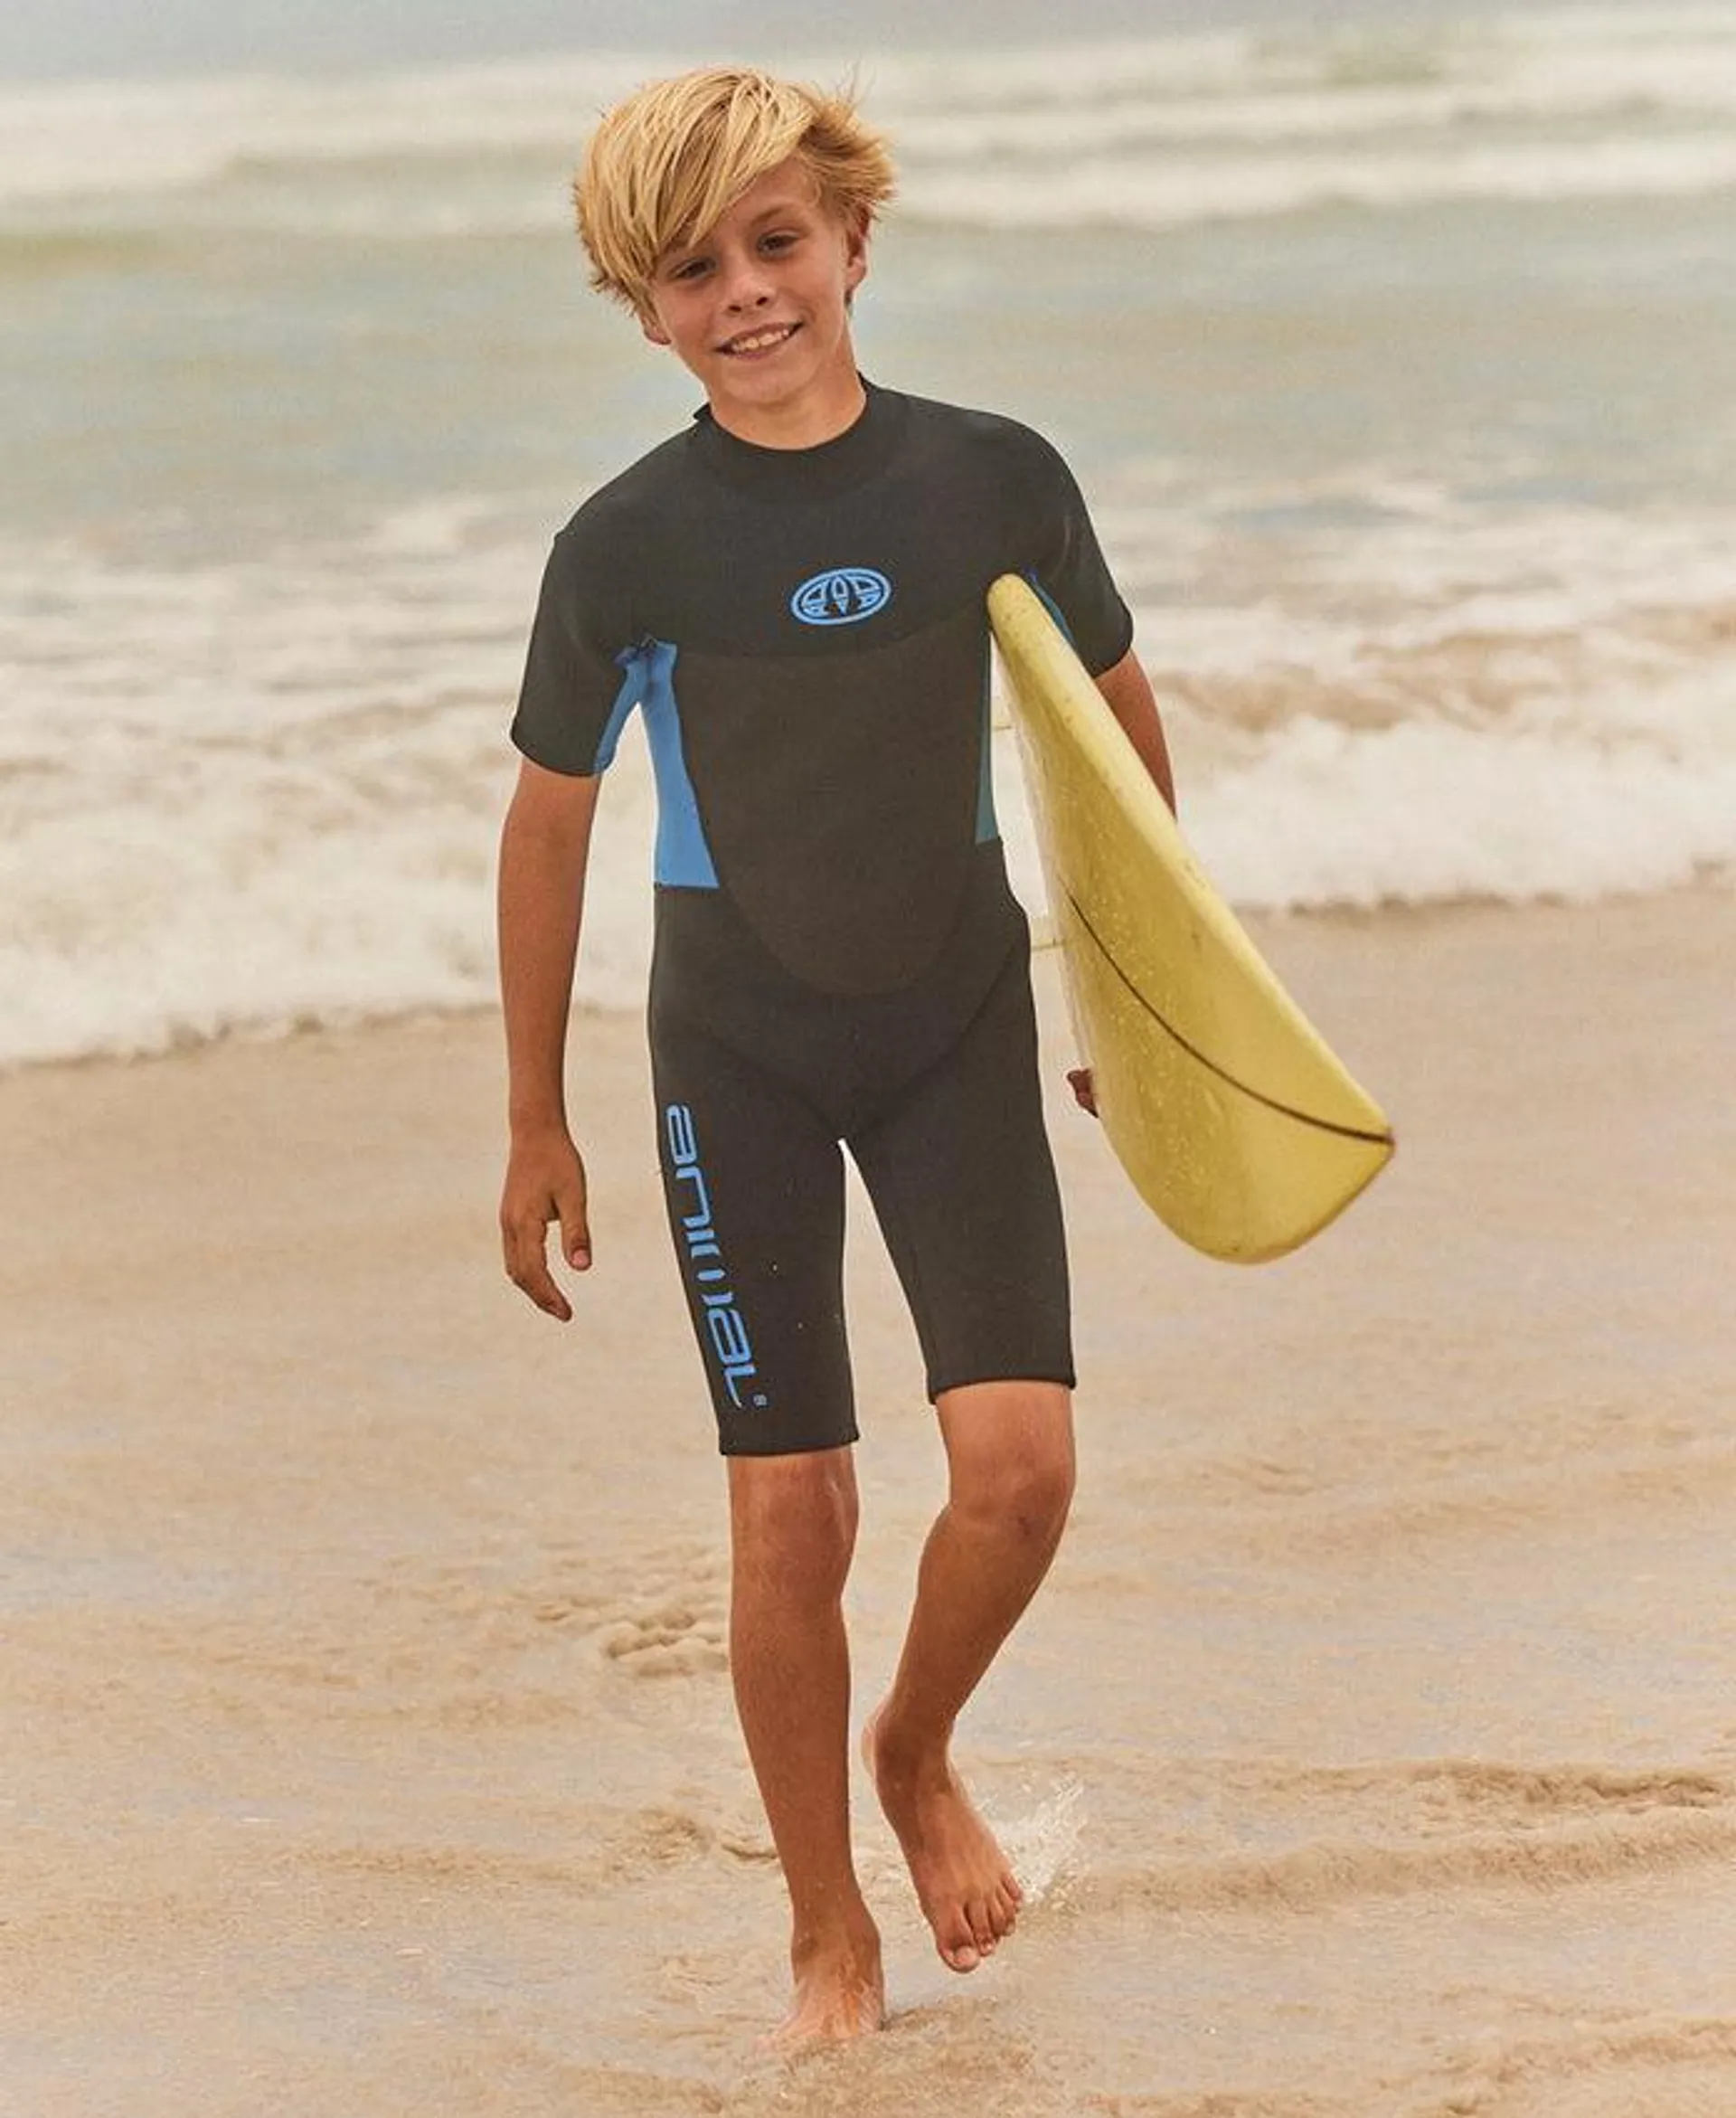 Waves Kids Shorty Wetsuit